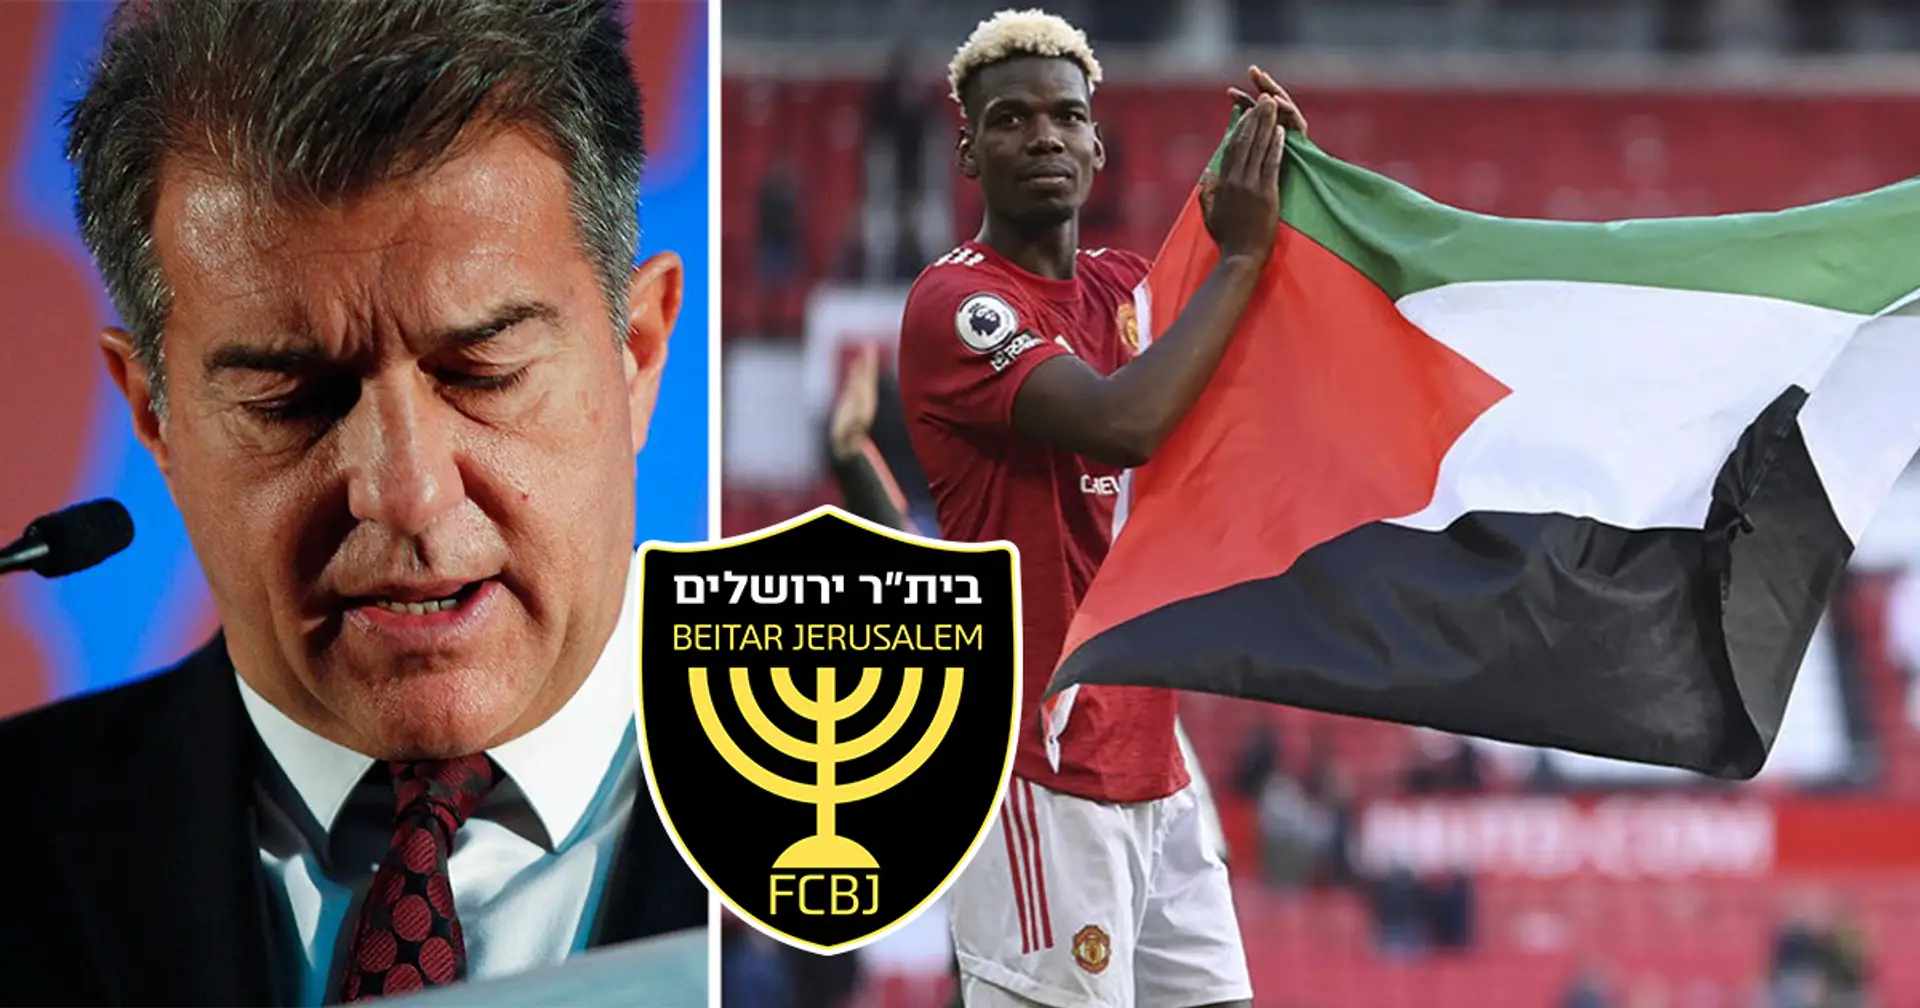 Palestine FA release statement, ask Barca to refrain from playing friendly vs 'anti-Arab' Beitar side